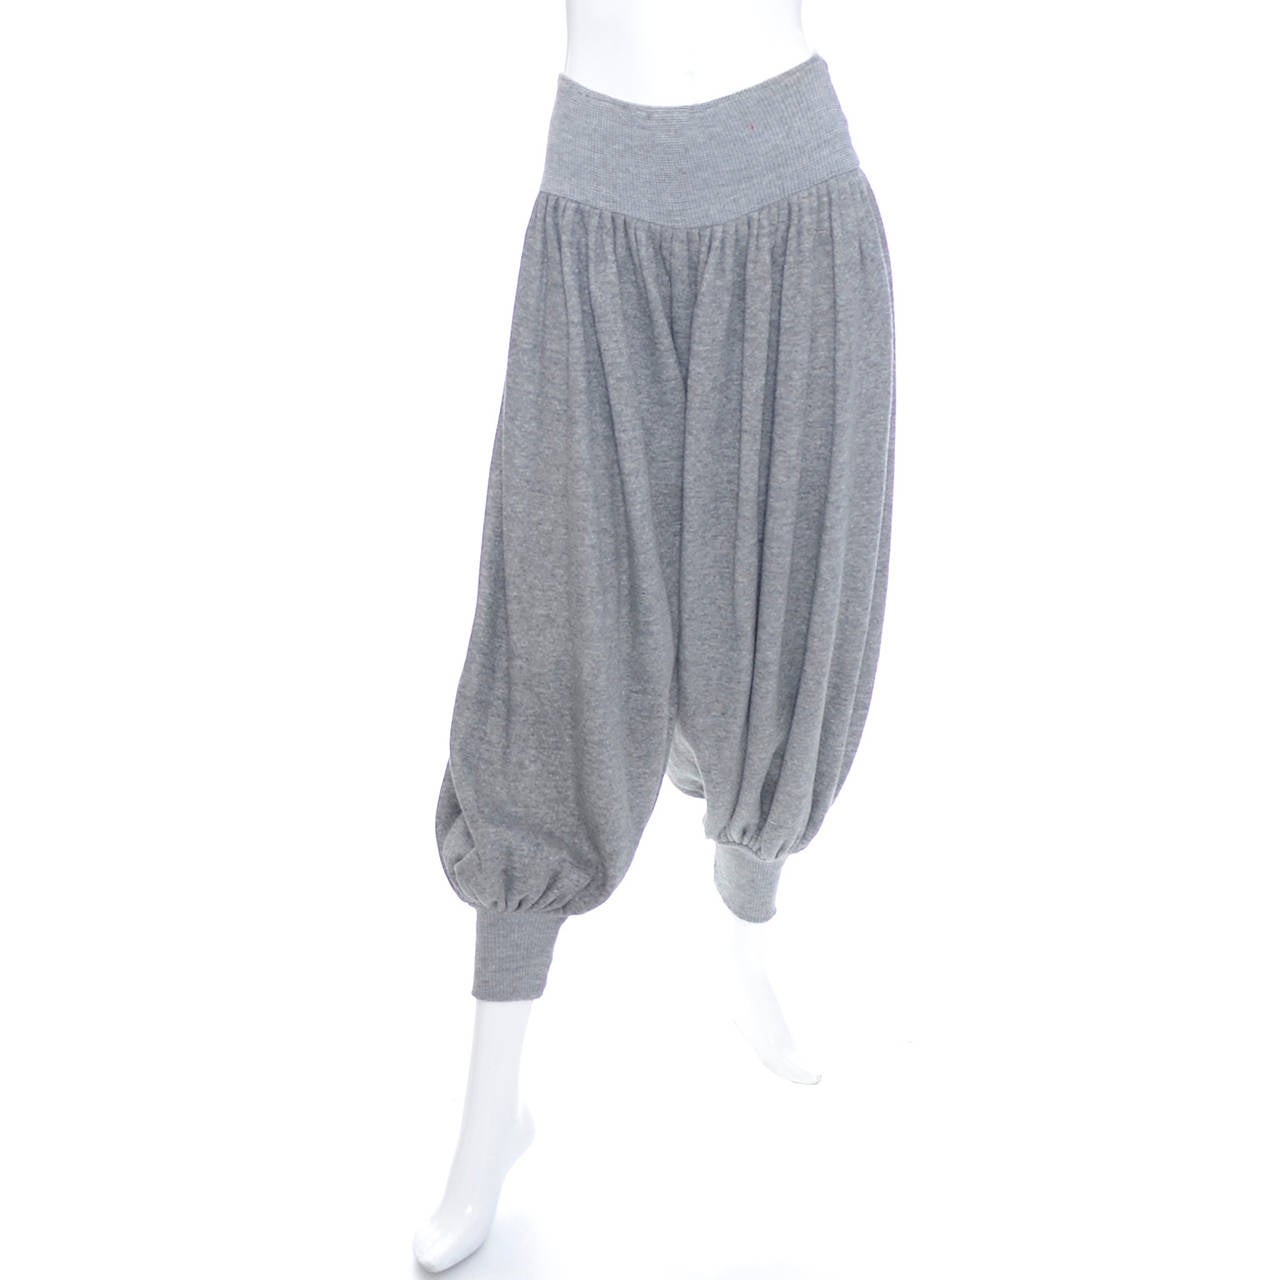 These vintage Norma Kamali sweatsuit inspired gray knicker harem pants are from 1981. They are gray cotton with soft fleece on the reverse side. These became an important signature piece for Norma Kamali.  They were part of a collection that was